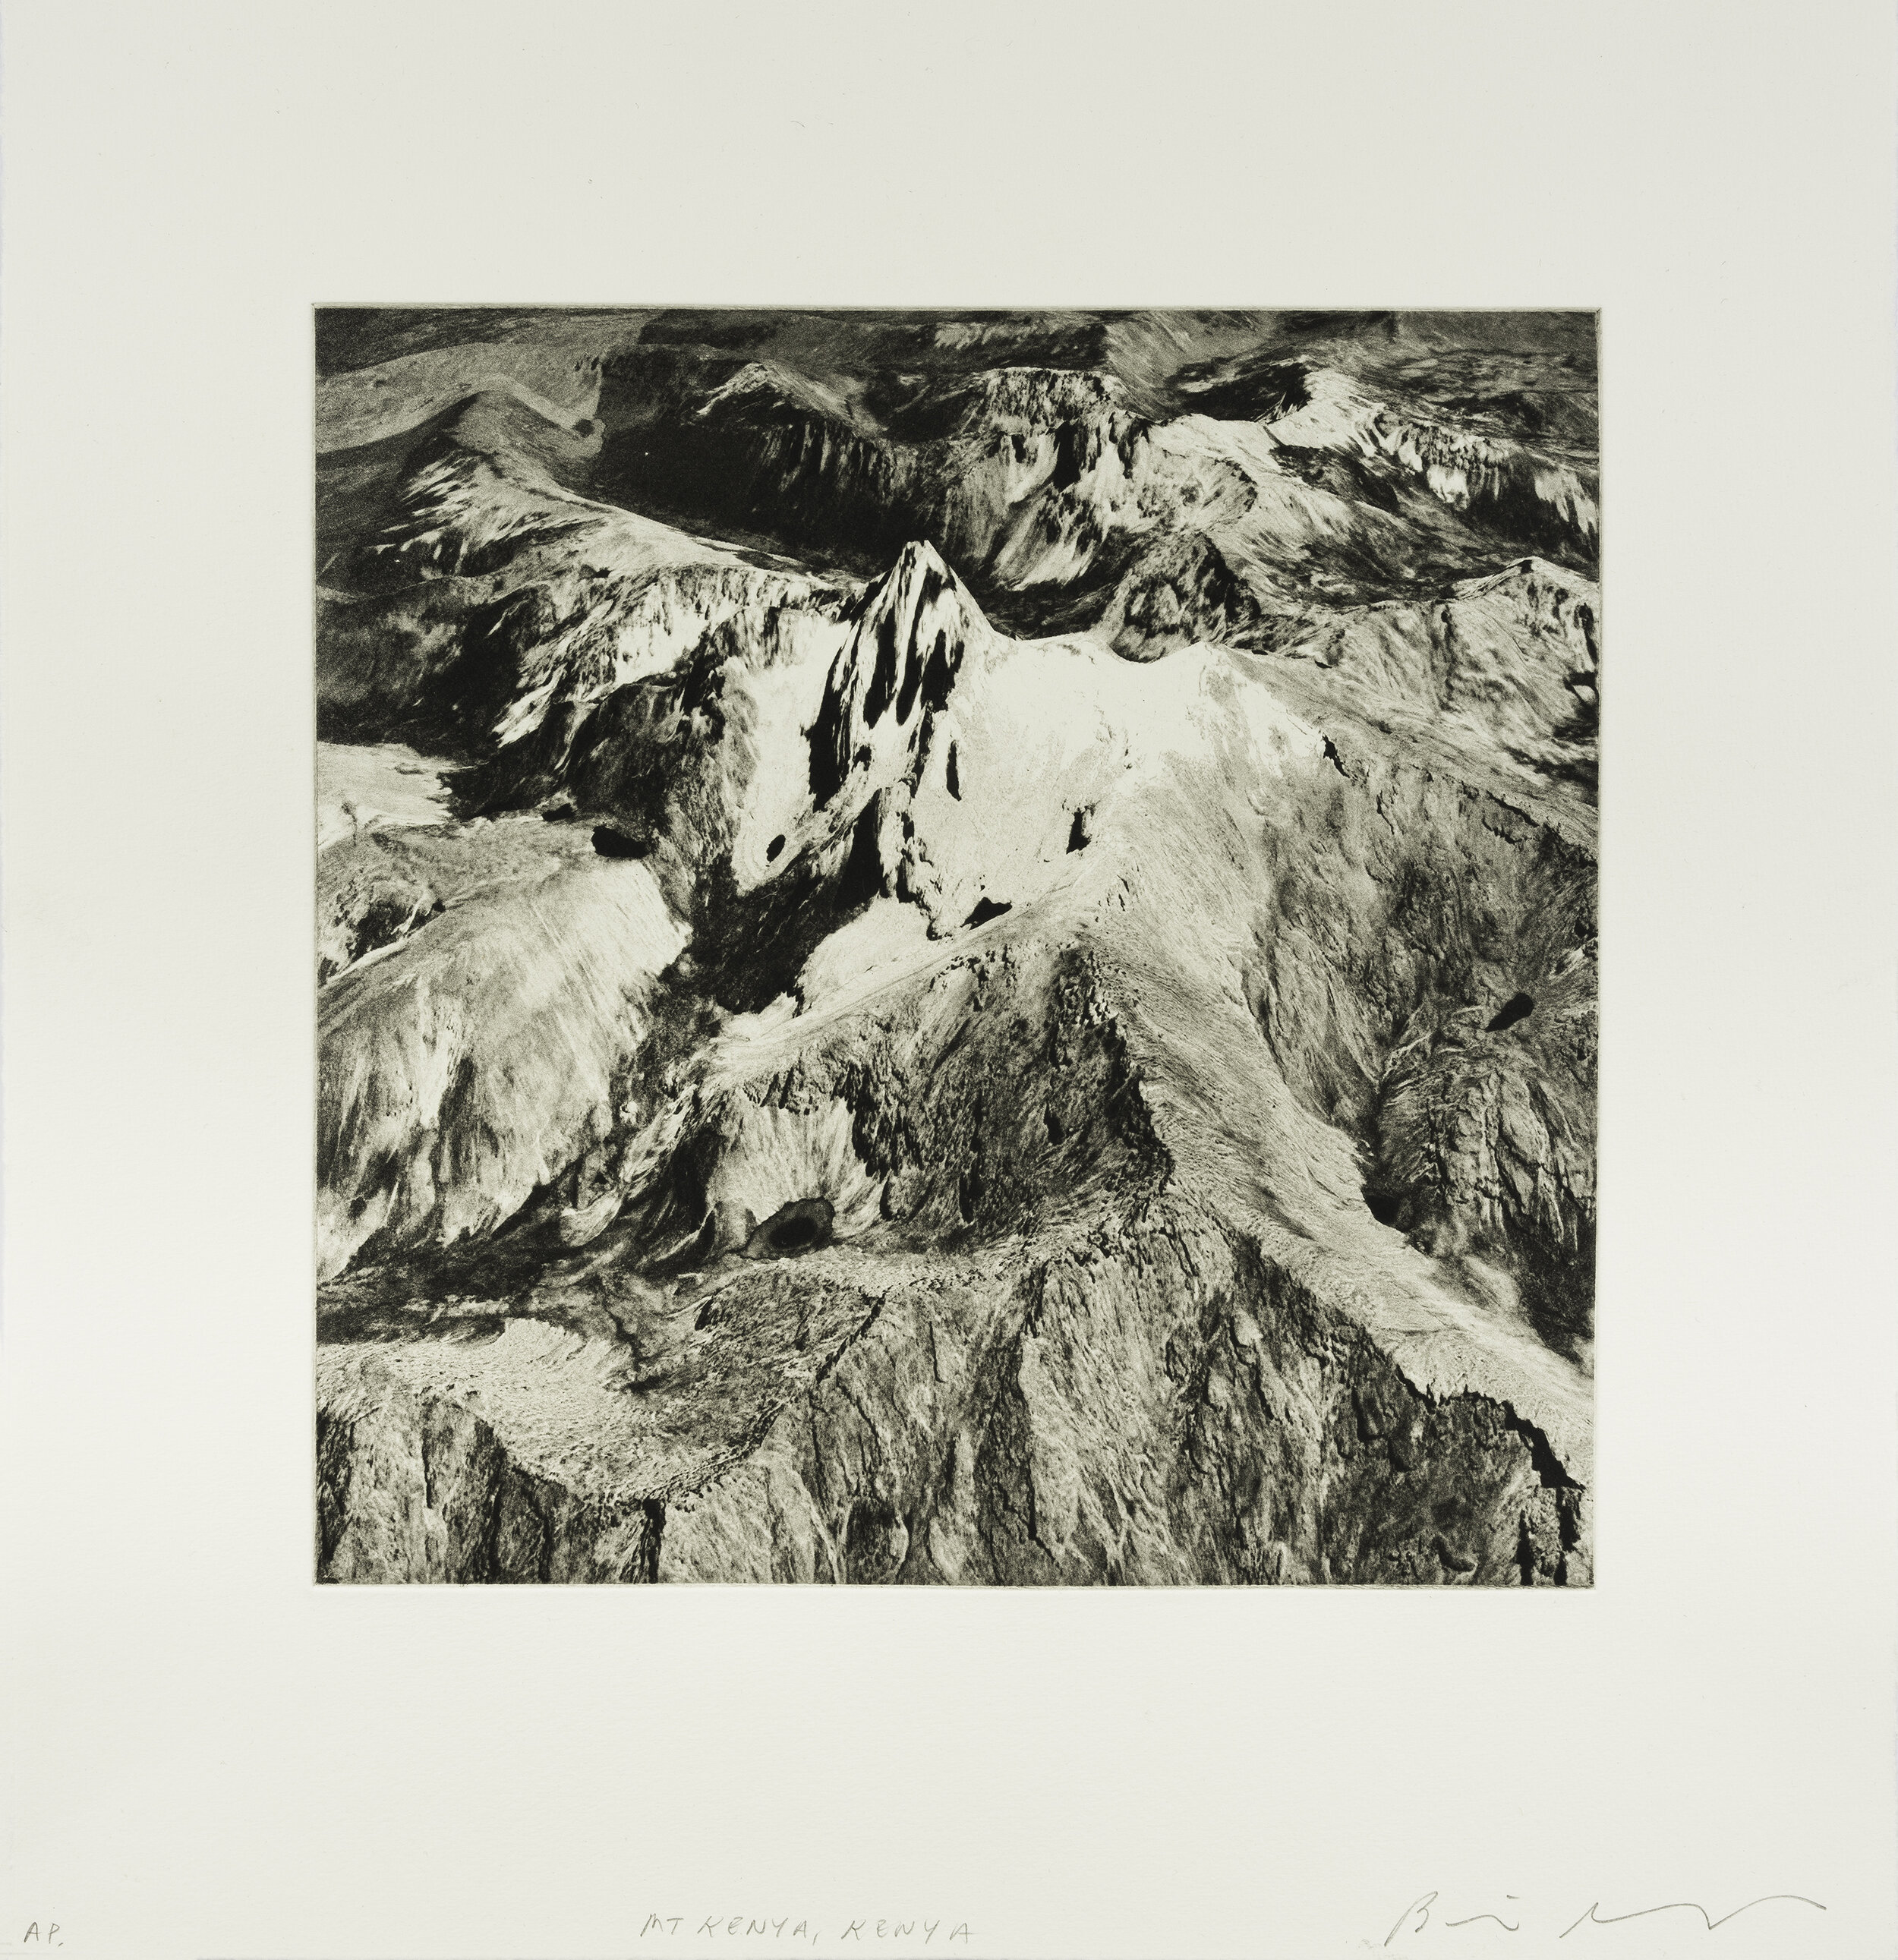    Mount Kenya, Kenya, 2020   Copperplate photogravure etching on cotton rag paper, plate size; 10.6 x 10.6, paper size; 16 x 15.5, edition 10  